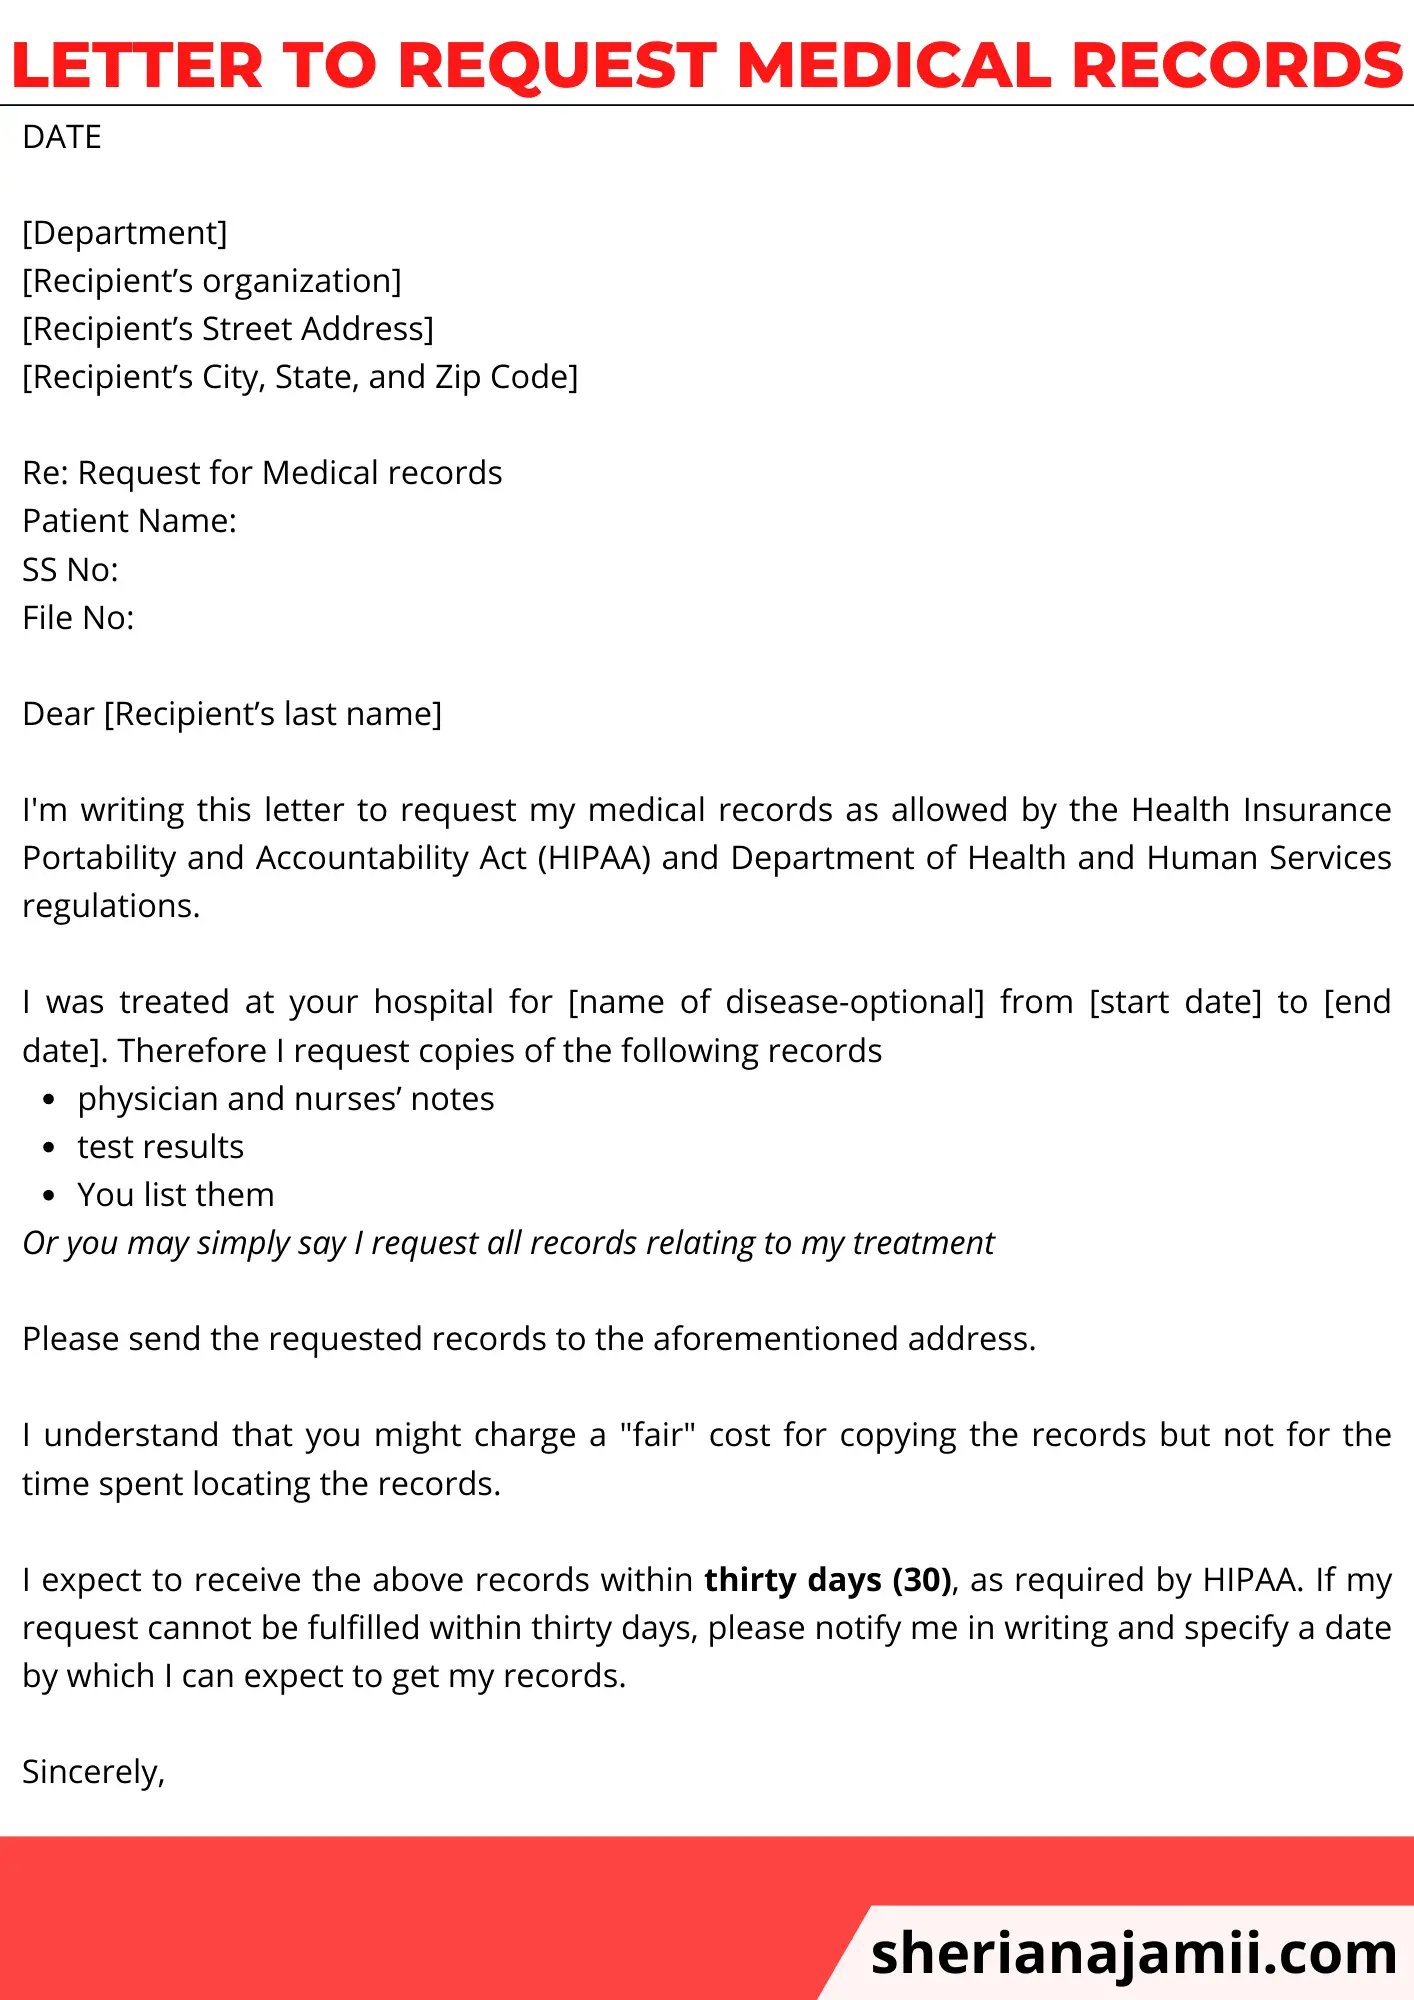 Letter to request medical records, sample Letter to request medical records, sample letter to request medical records from doctors, medical records request letter,